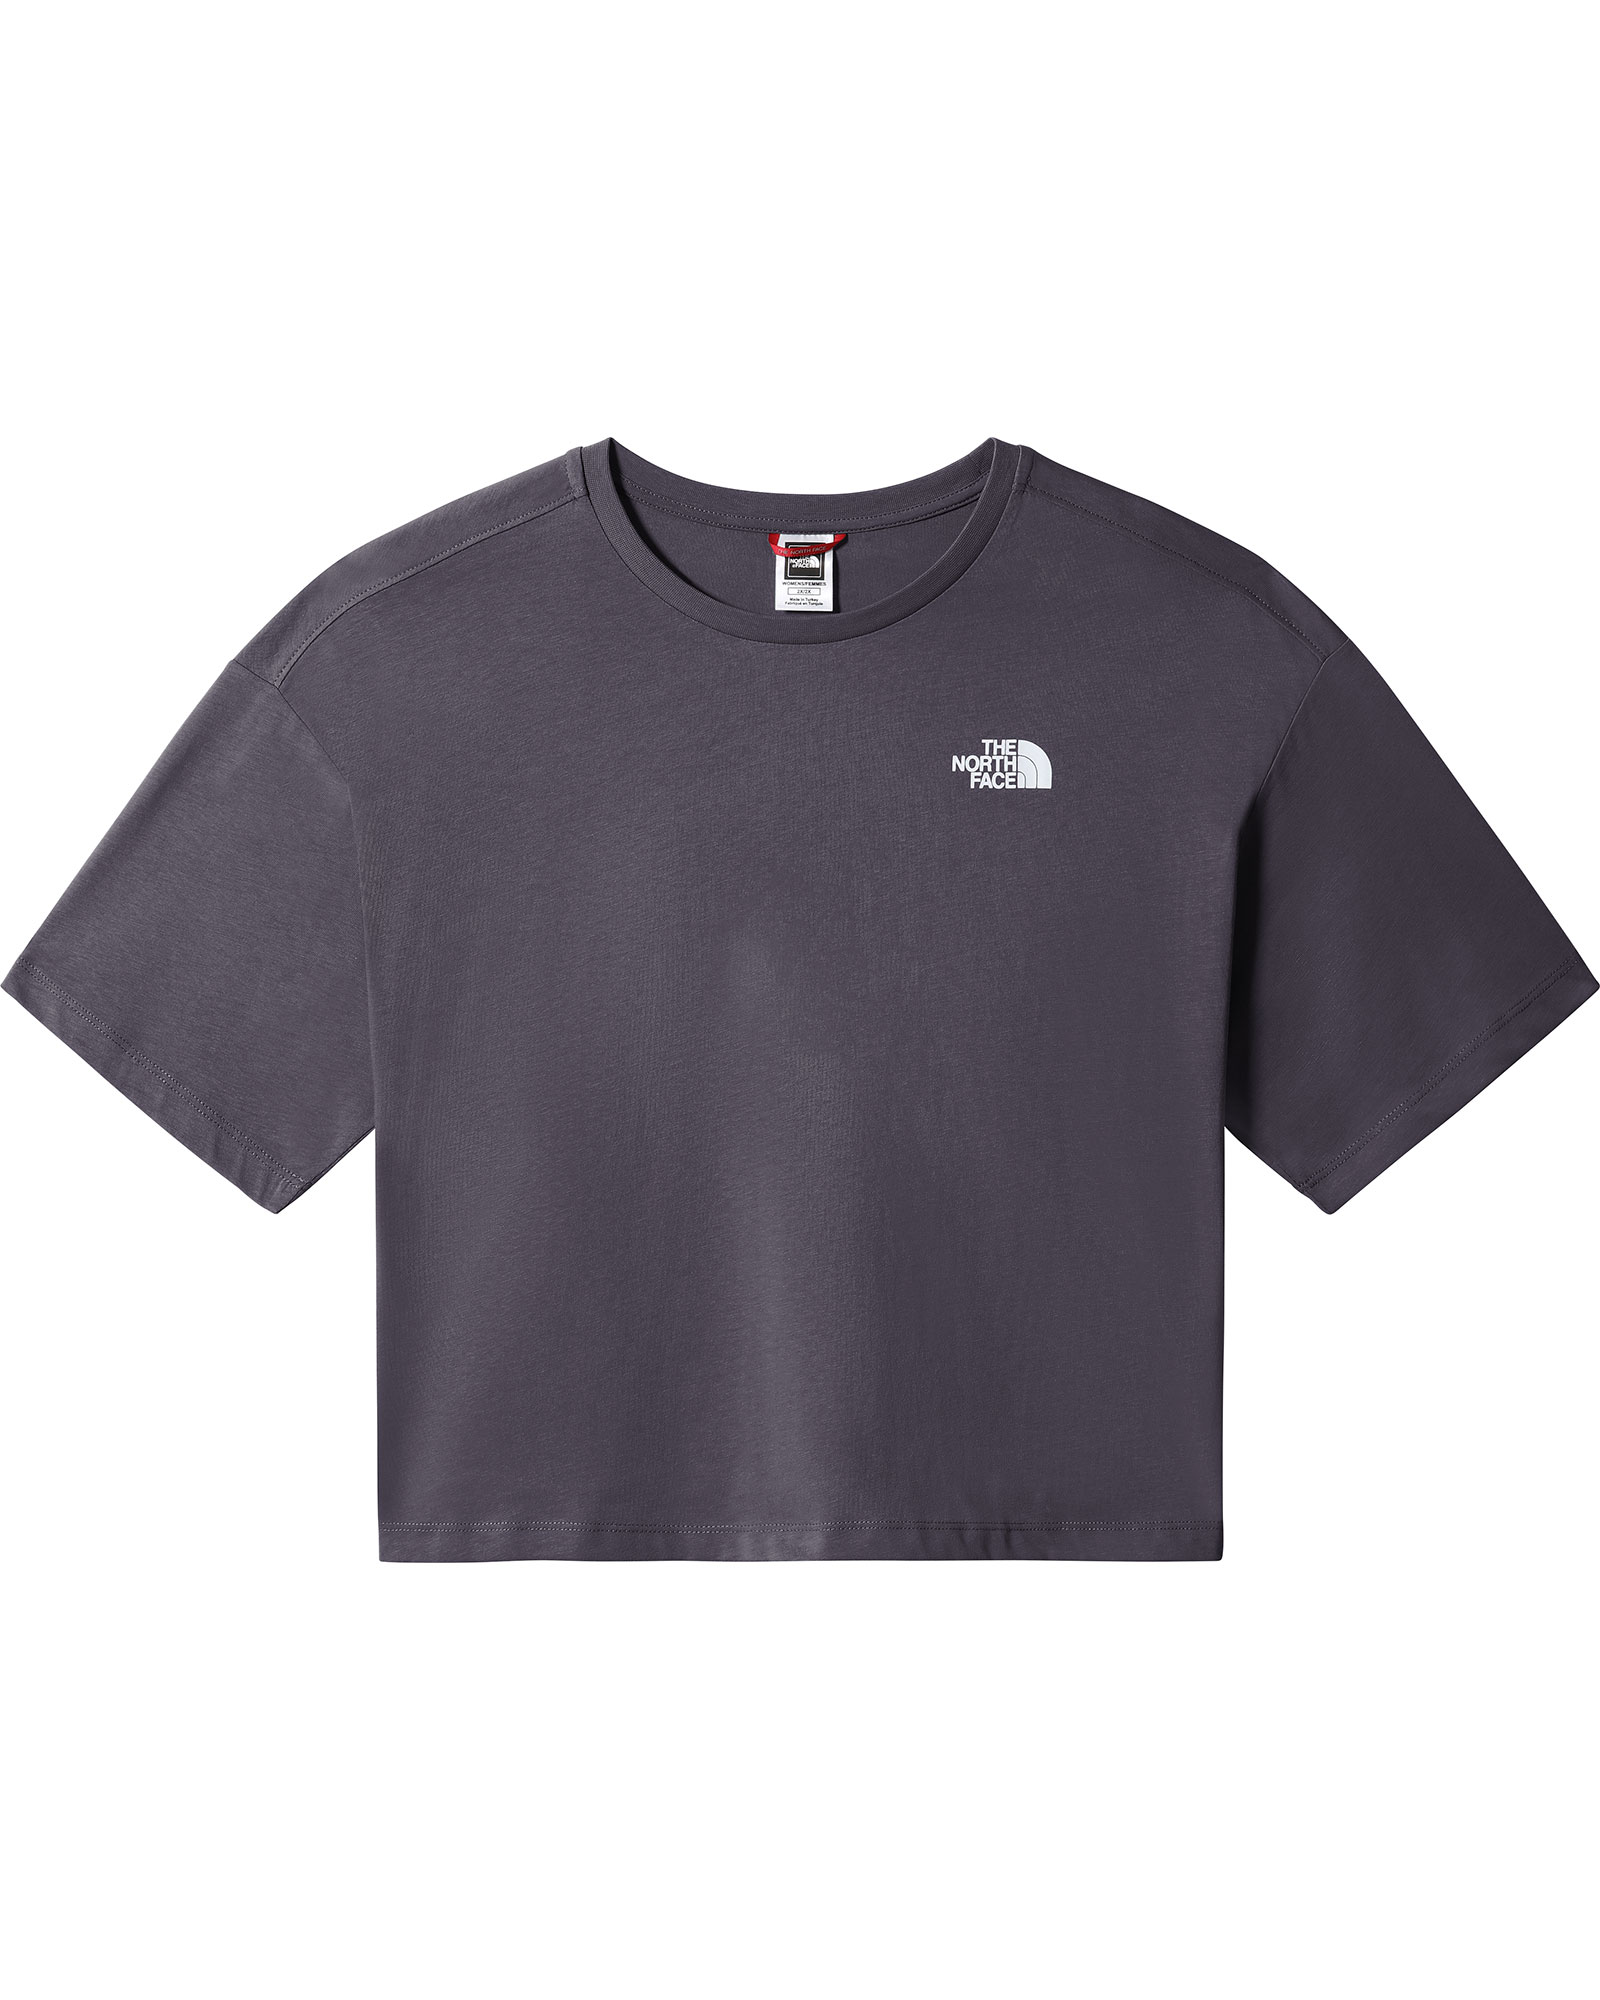 The North Face Plus Cropped Simple Dome Women’s T Shirt - Lunar Slate 1X